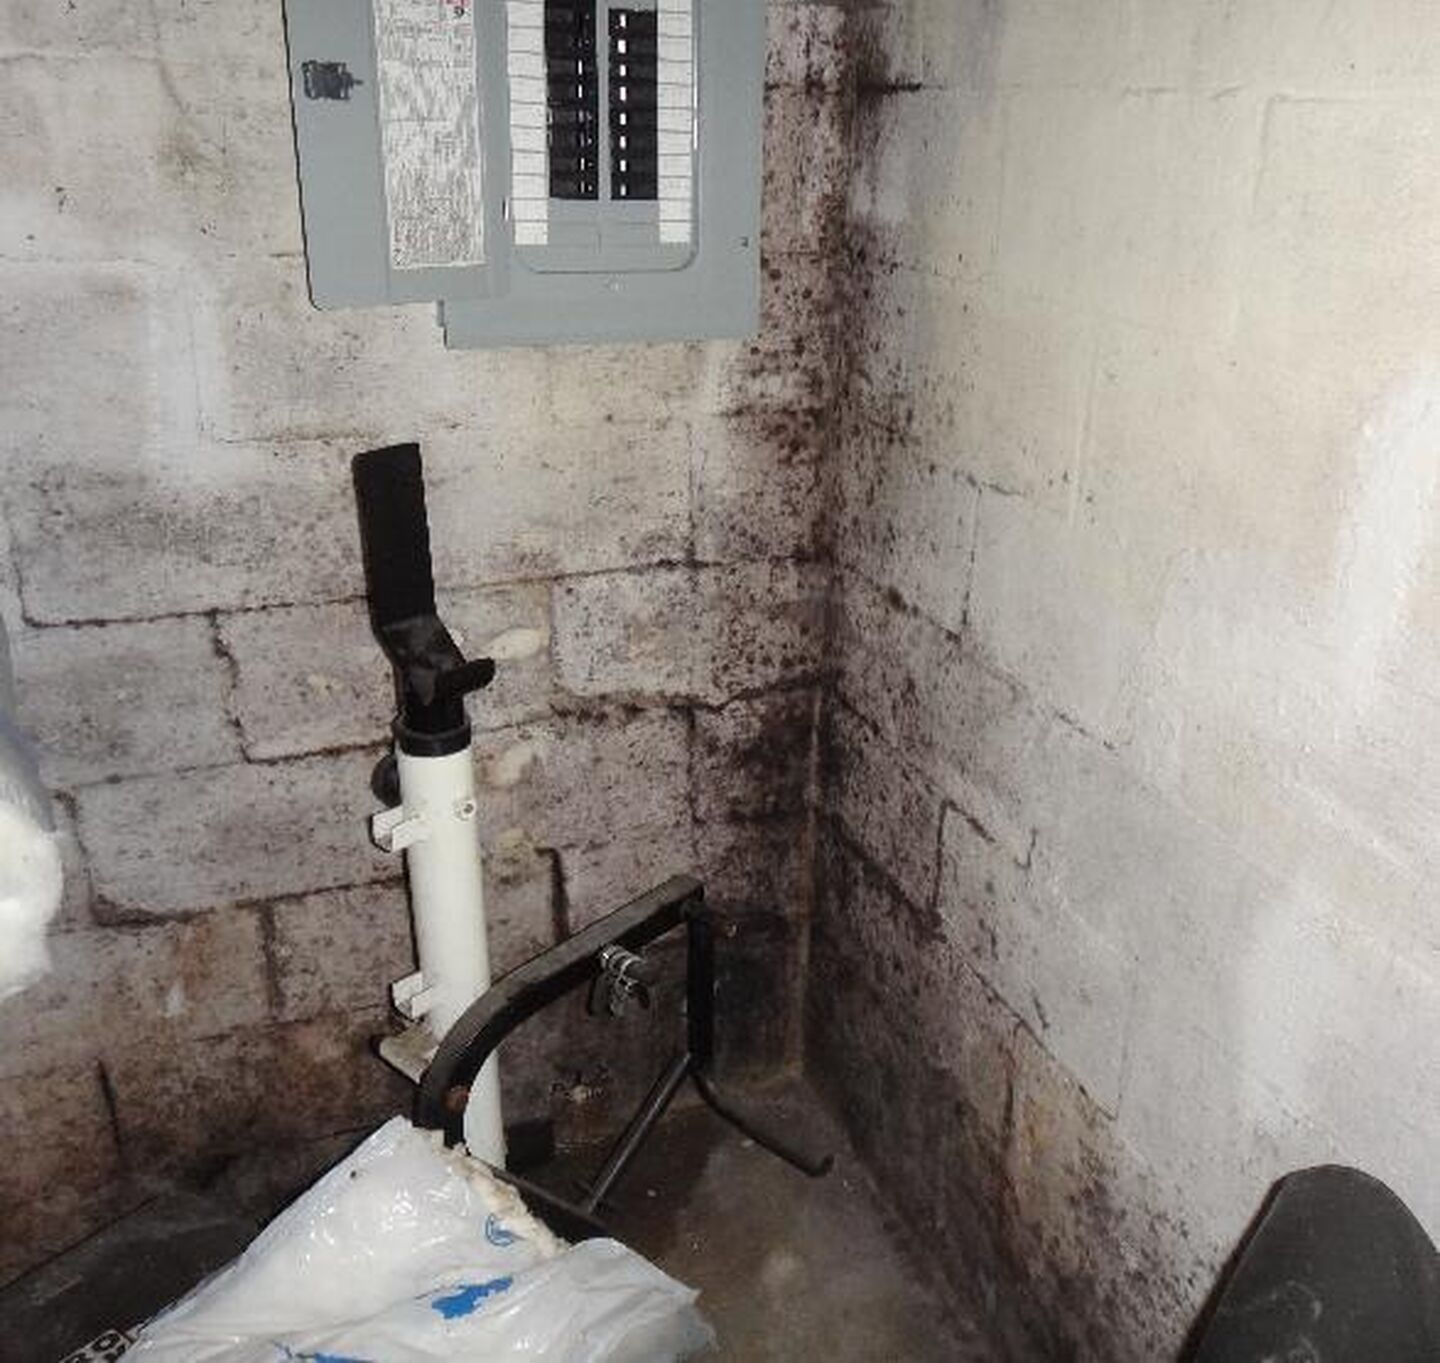 U.S. Waterproofing  Guide to Basement Moisture Control - 5 Steps To…